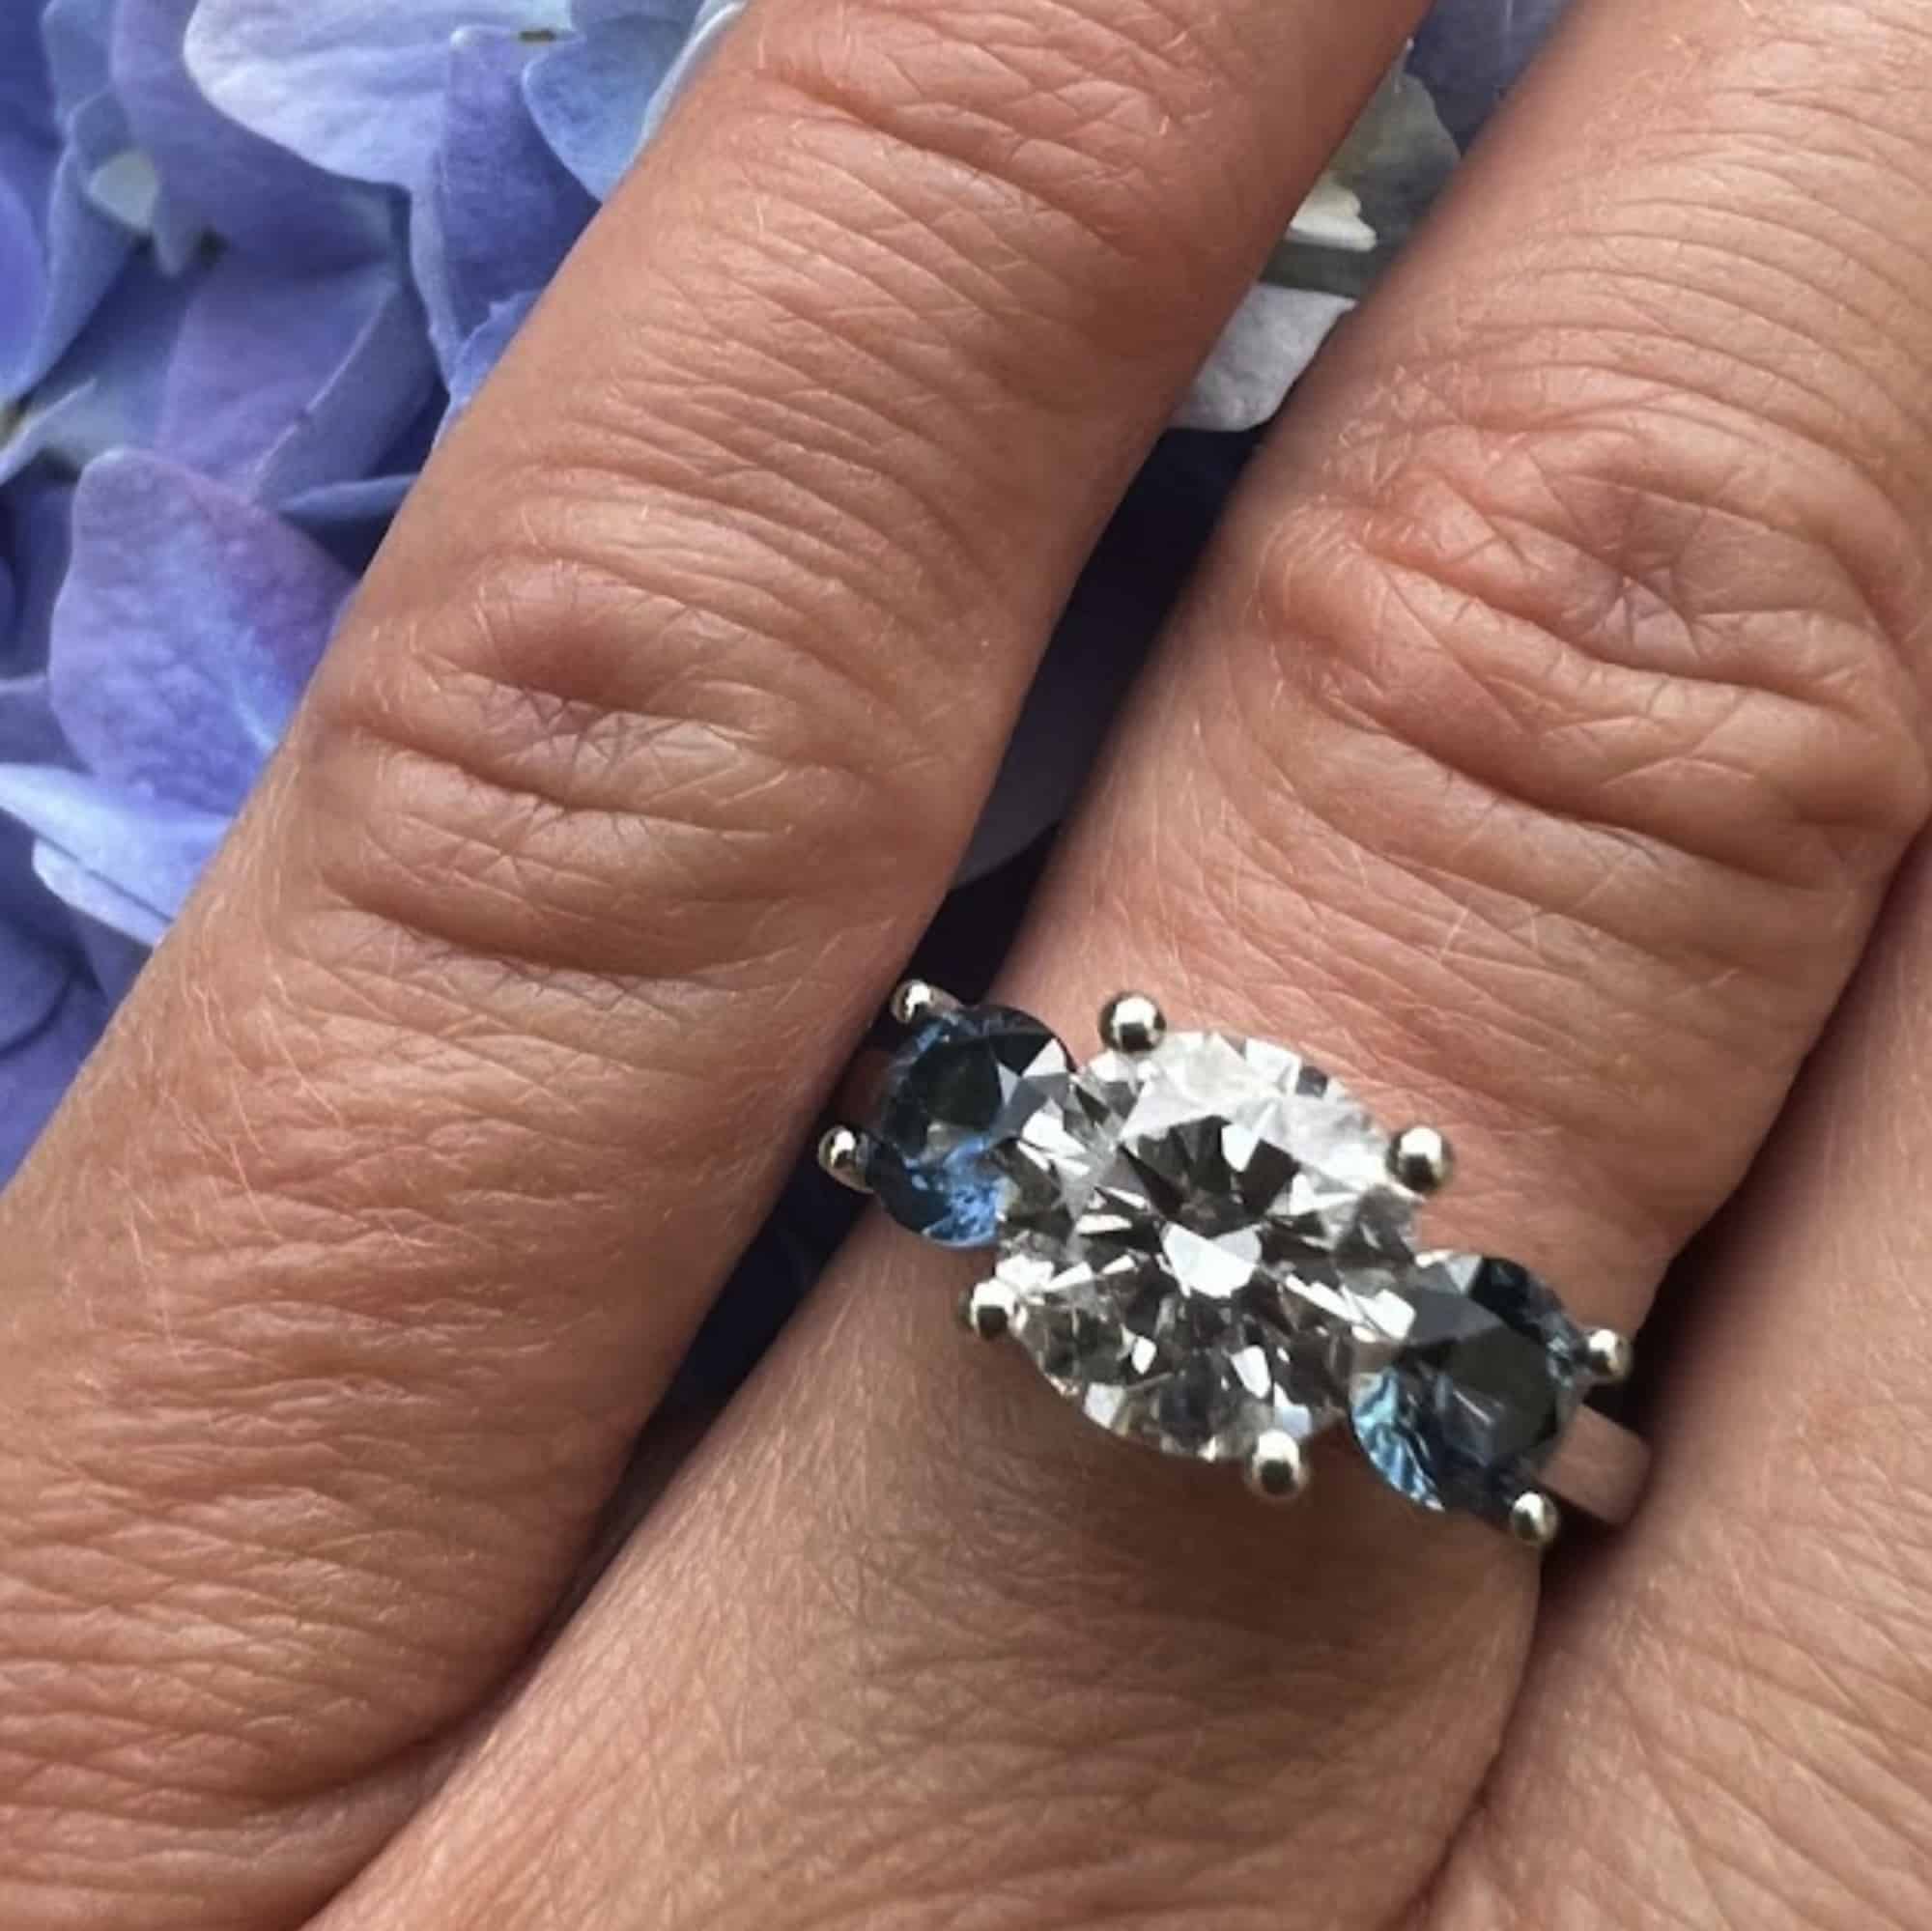 A photo from a customer review featuring a custom ring with heirloom diamond and Montana sapphire side stones, on a hand against light violet hydrangeas